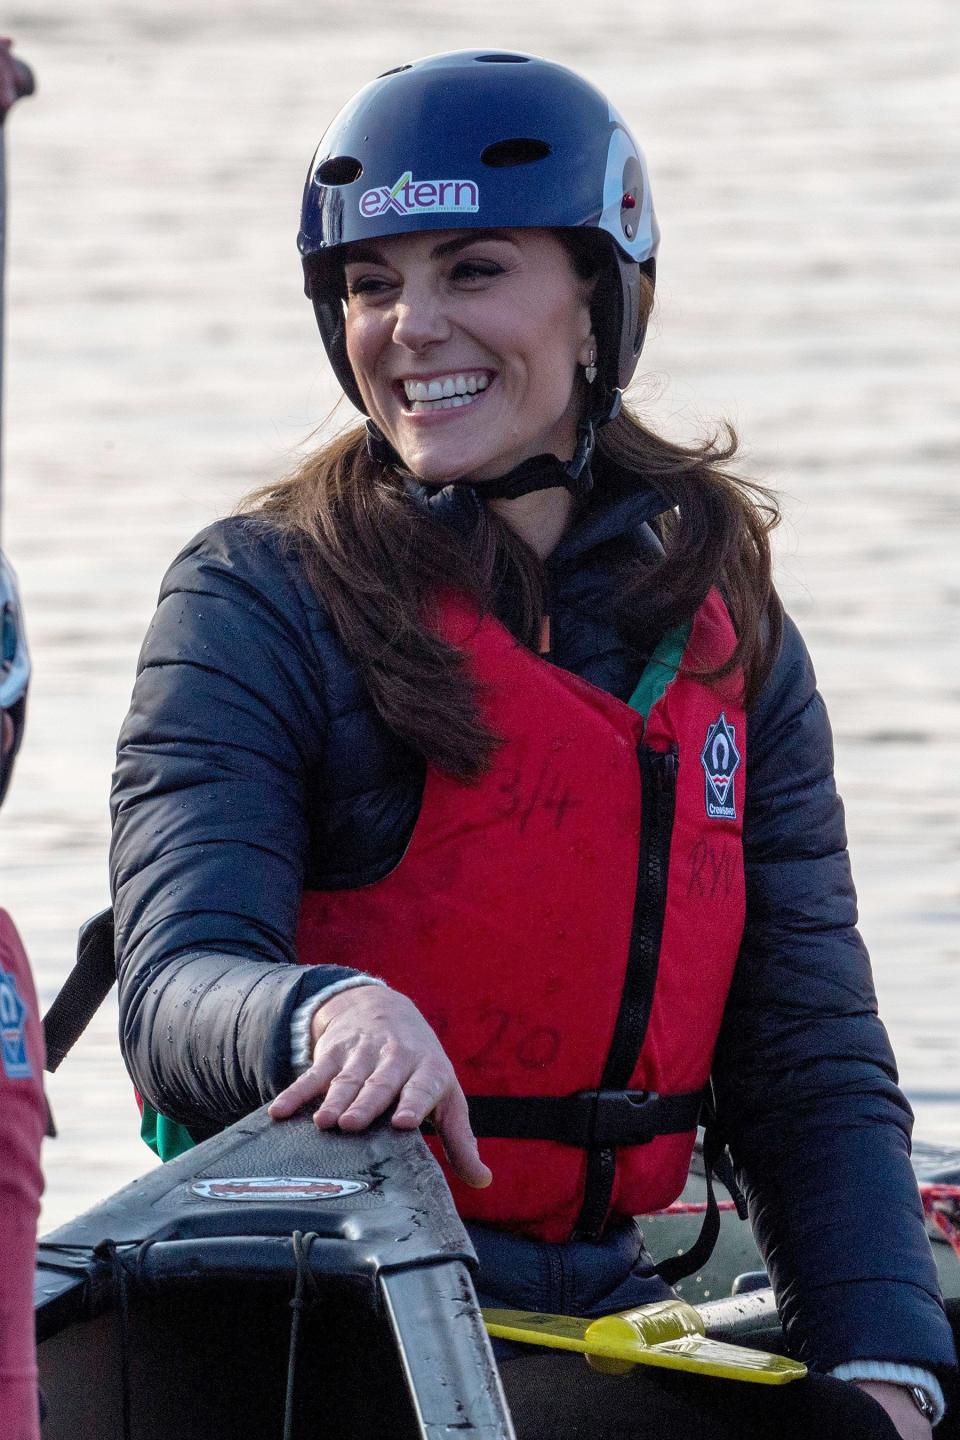 The royal mom covered up her puffer jacket with a helmet and life jacket while competing in a boat race in Northern Ireland in Feb. 2019.